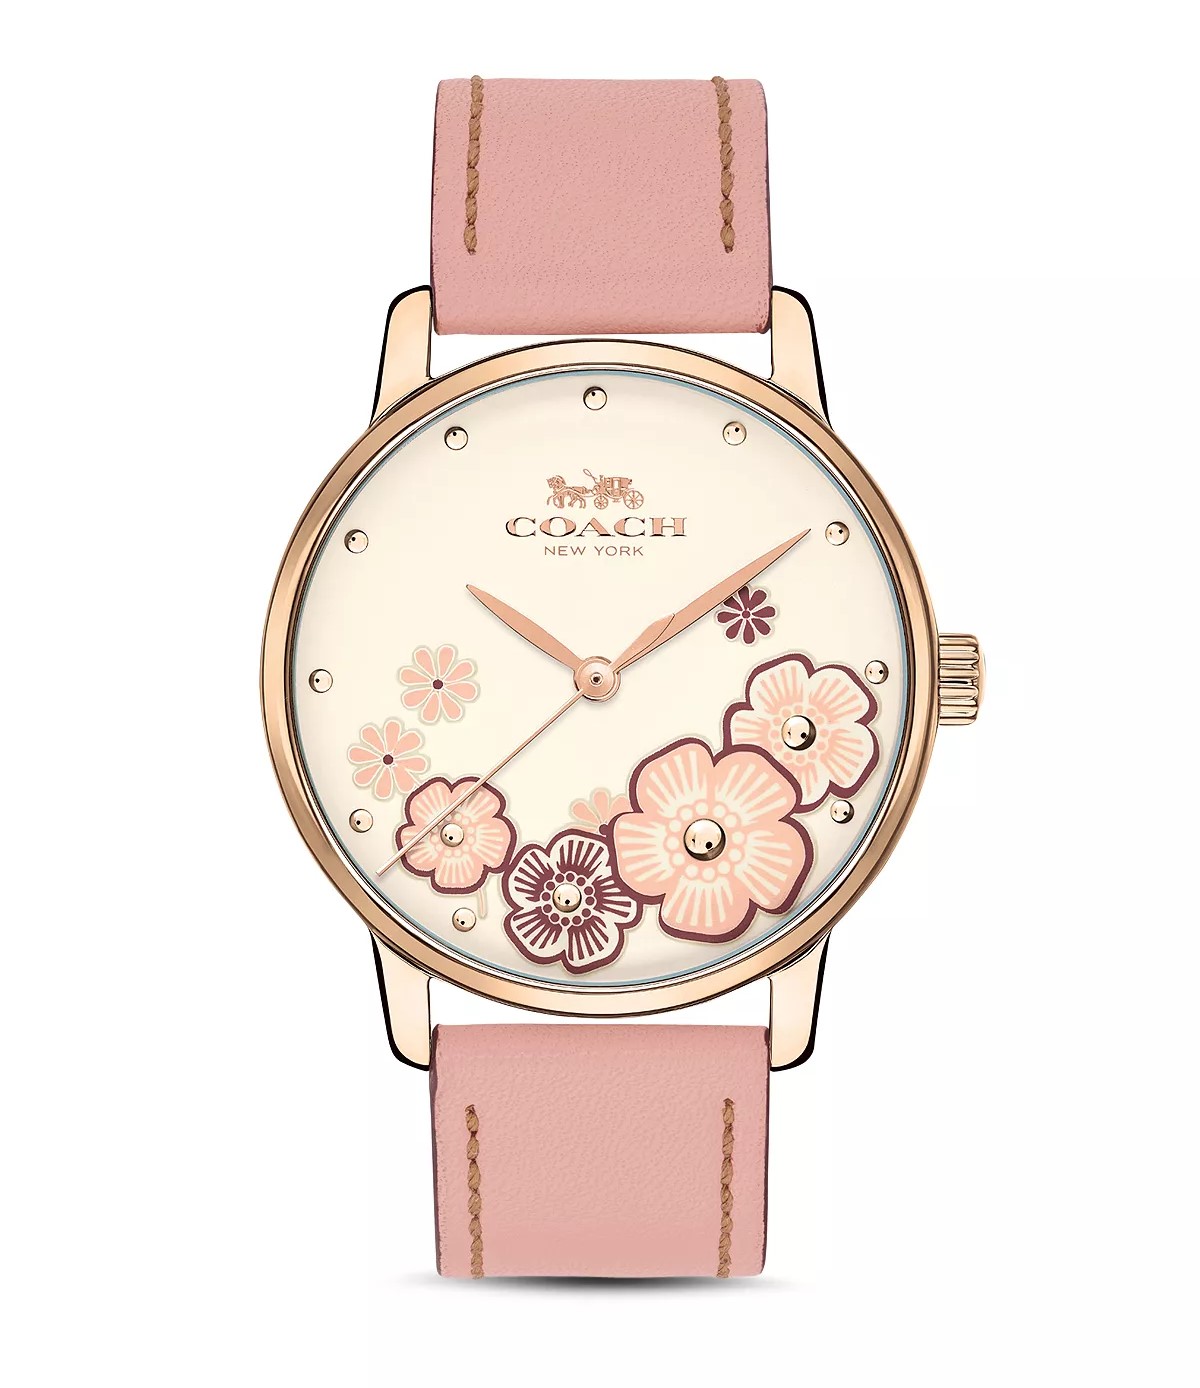 ĐỒNG HỒ NỮ DÂY DA HỒNG COACH FLORAL GRAND ANALOG QUART GOLD STAINLESS STEEL PINK LEATHER STRAP WOMEN WATCH 14503060 4